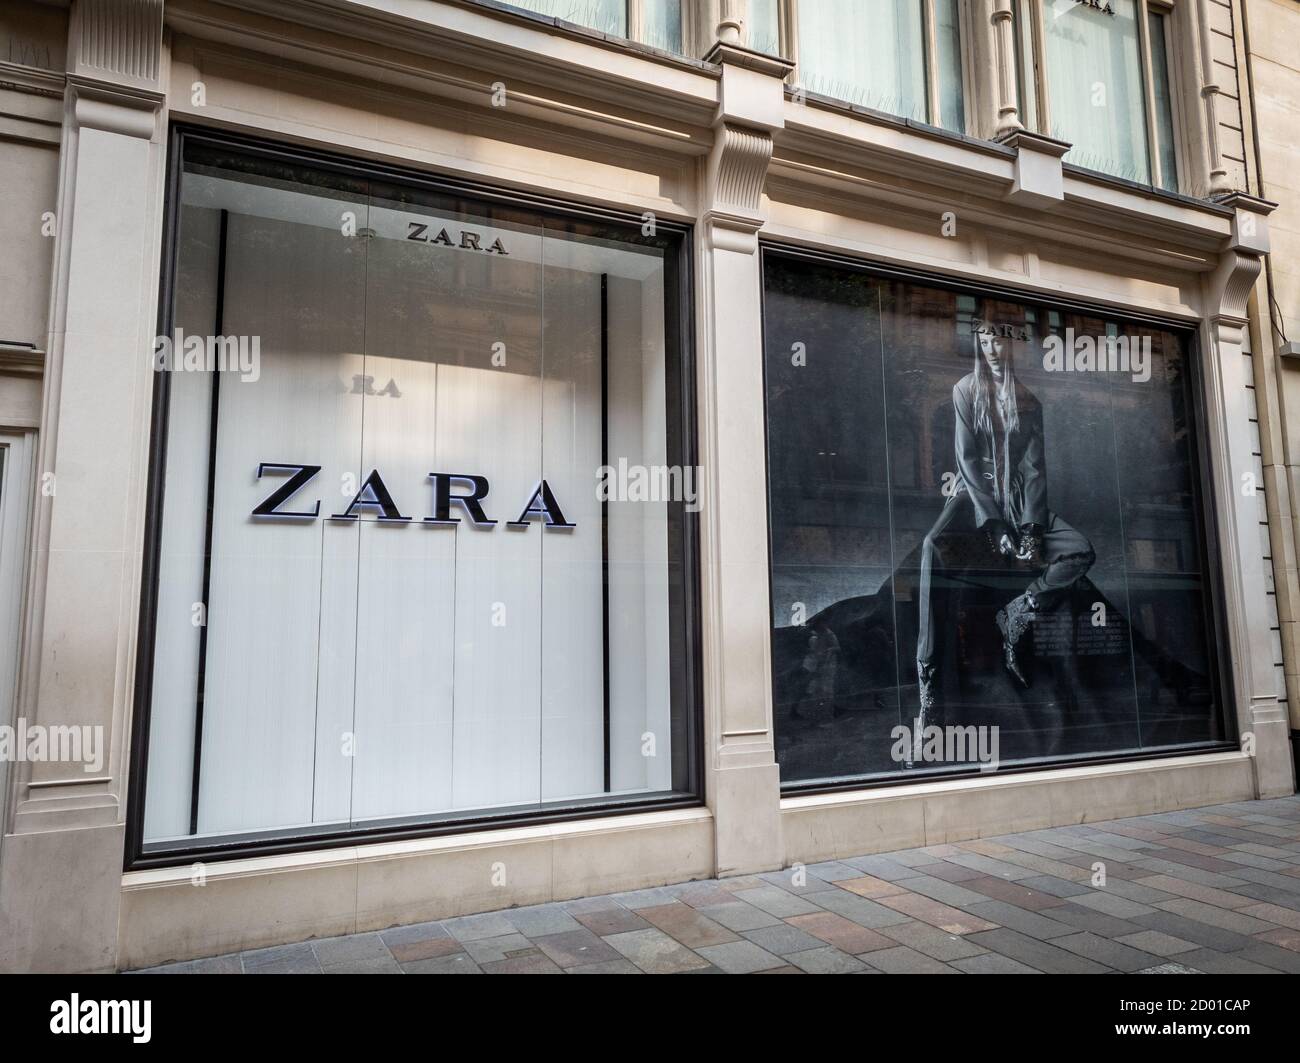 Zara Kids Shop High Resolution Stock Photography and Images - Alamy